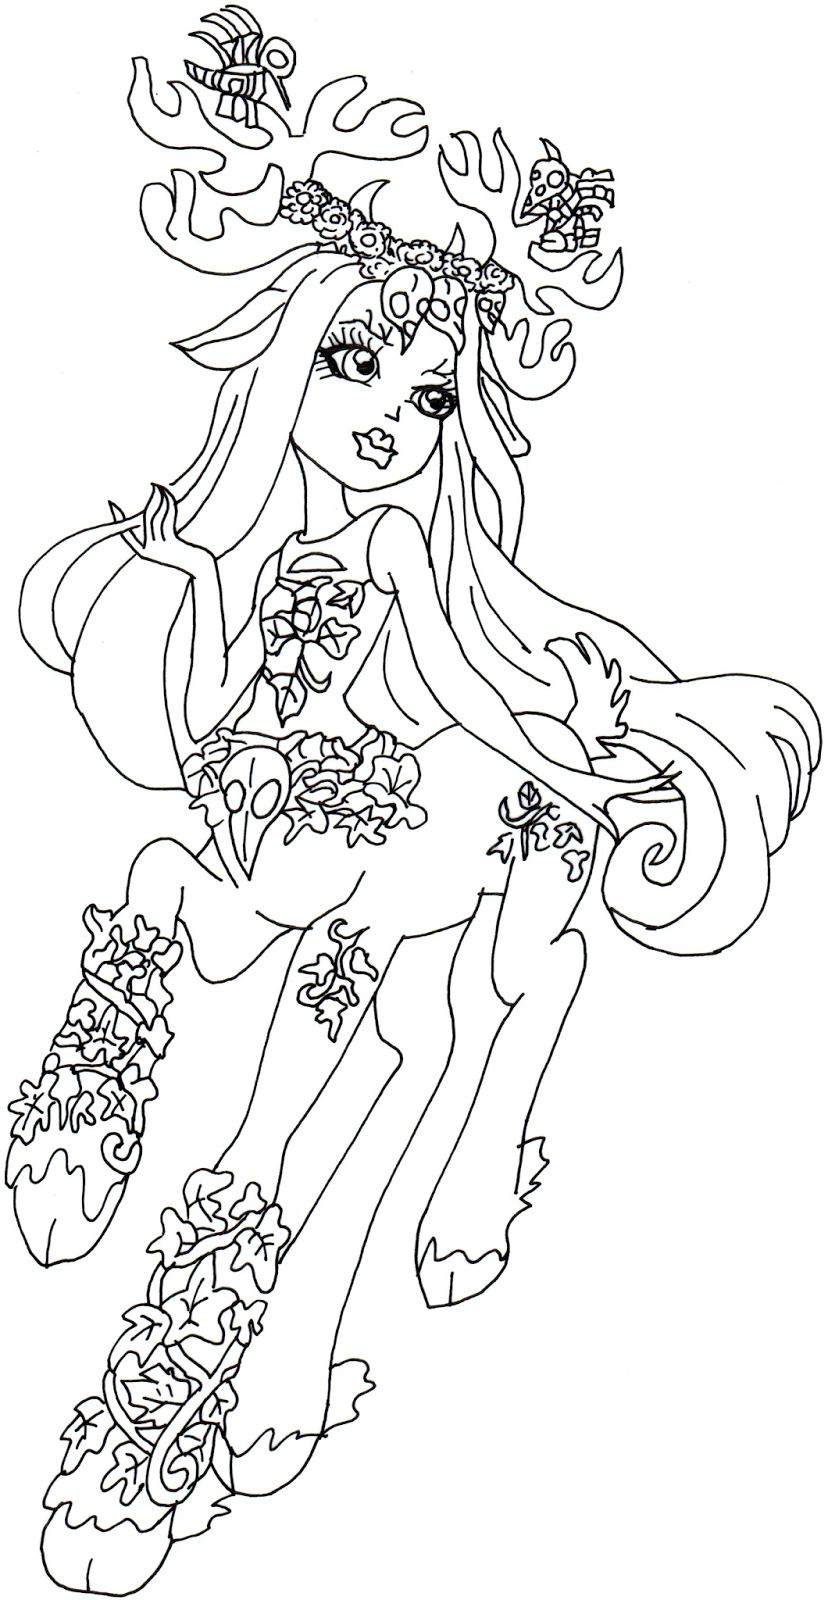 free-printable-monster-high-coloring-pages-fawntine-fallowheart